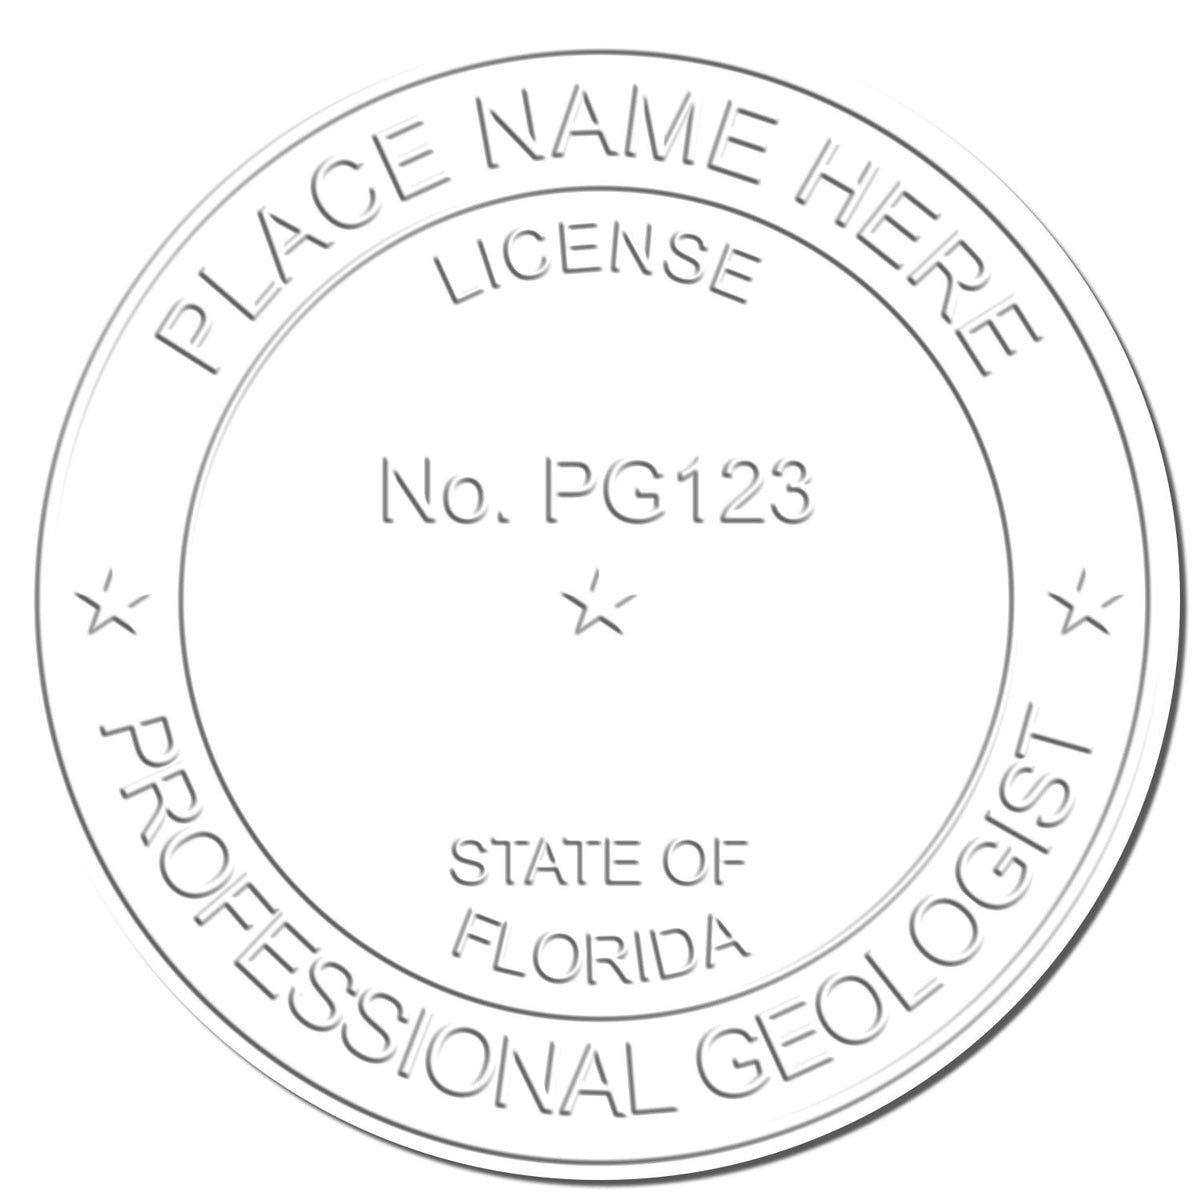 A stamped imprint of the Soft Florida Professional Geologist Seal in this stylish lifestyle photo, setting the tone for a unique and personalized product.